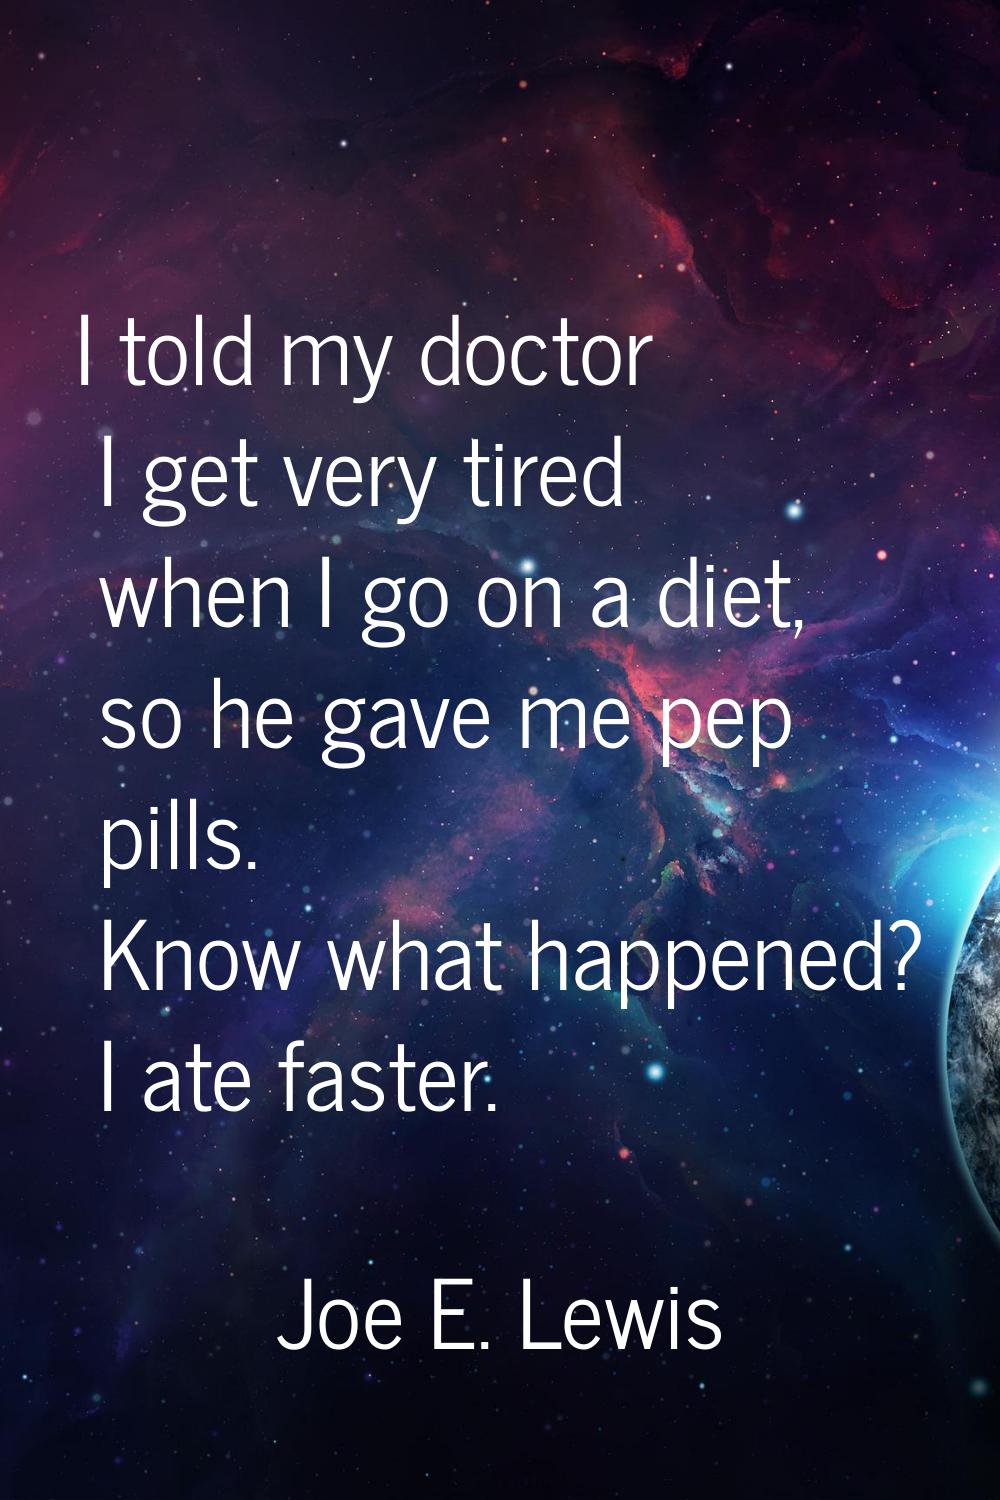 I told my doctor I get very tired when I go on a diet, so he gave me pep pills. Know what happened?